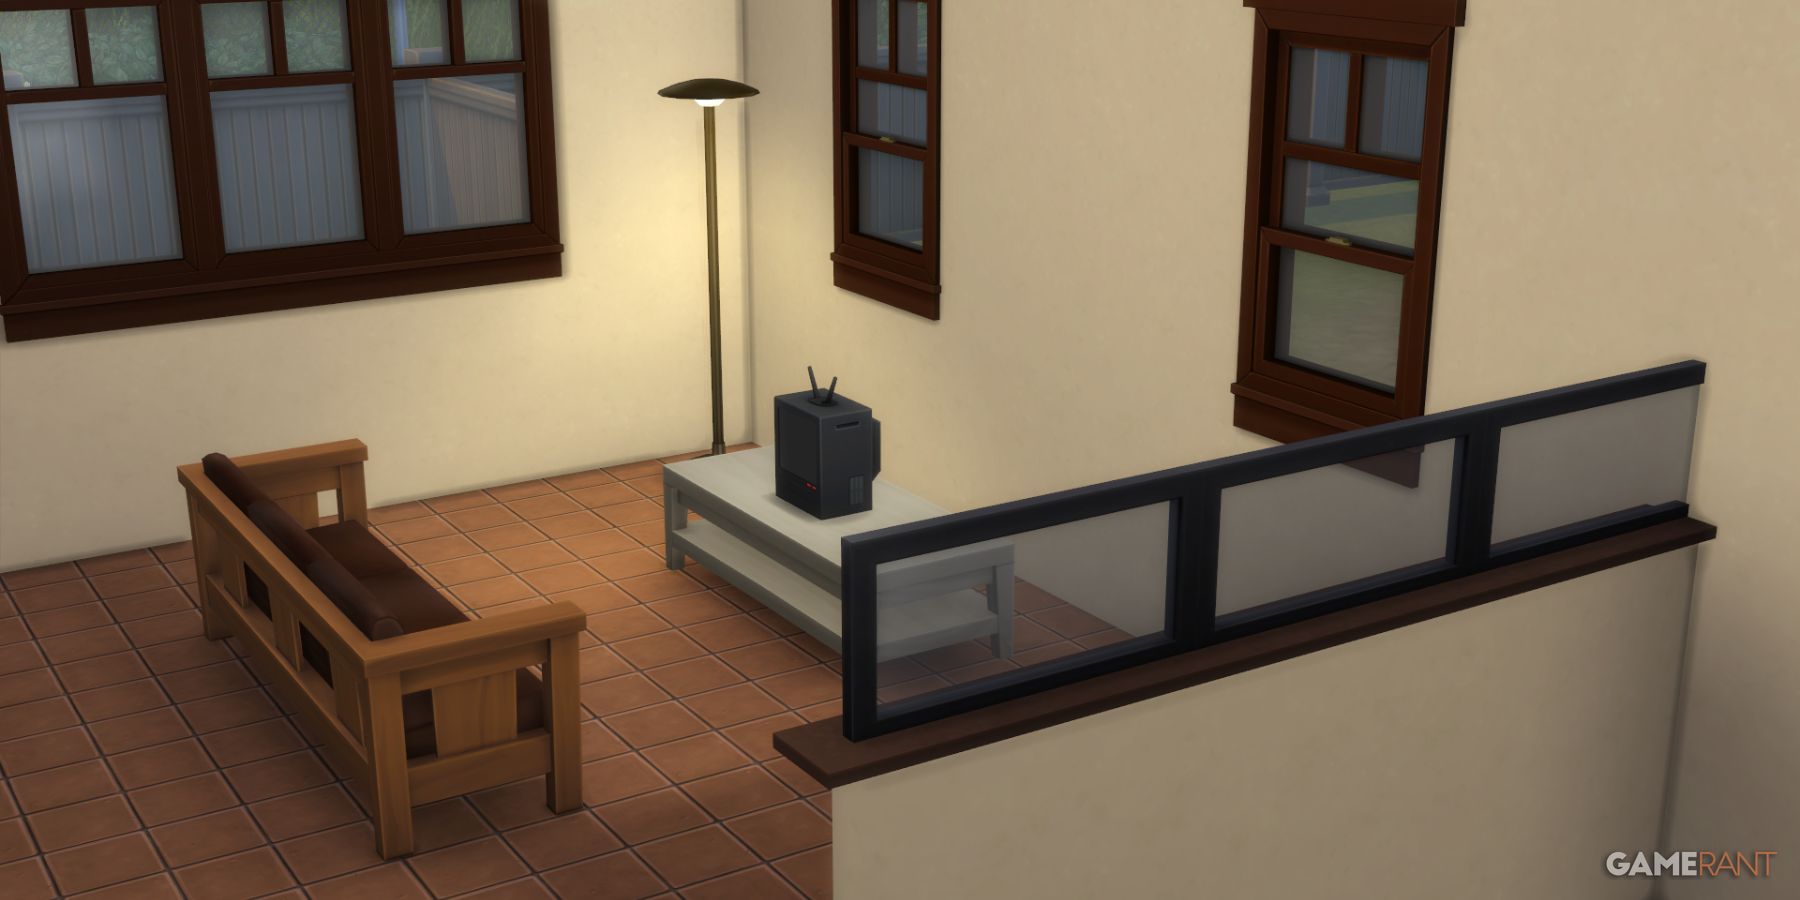 Half Wall Divider in The Sims 4 